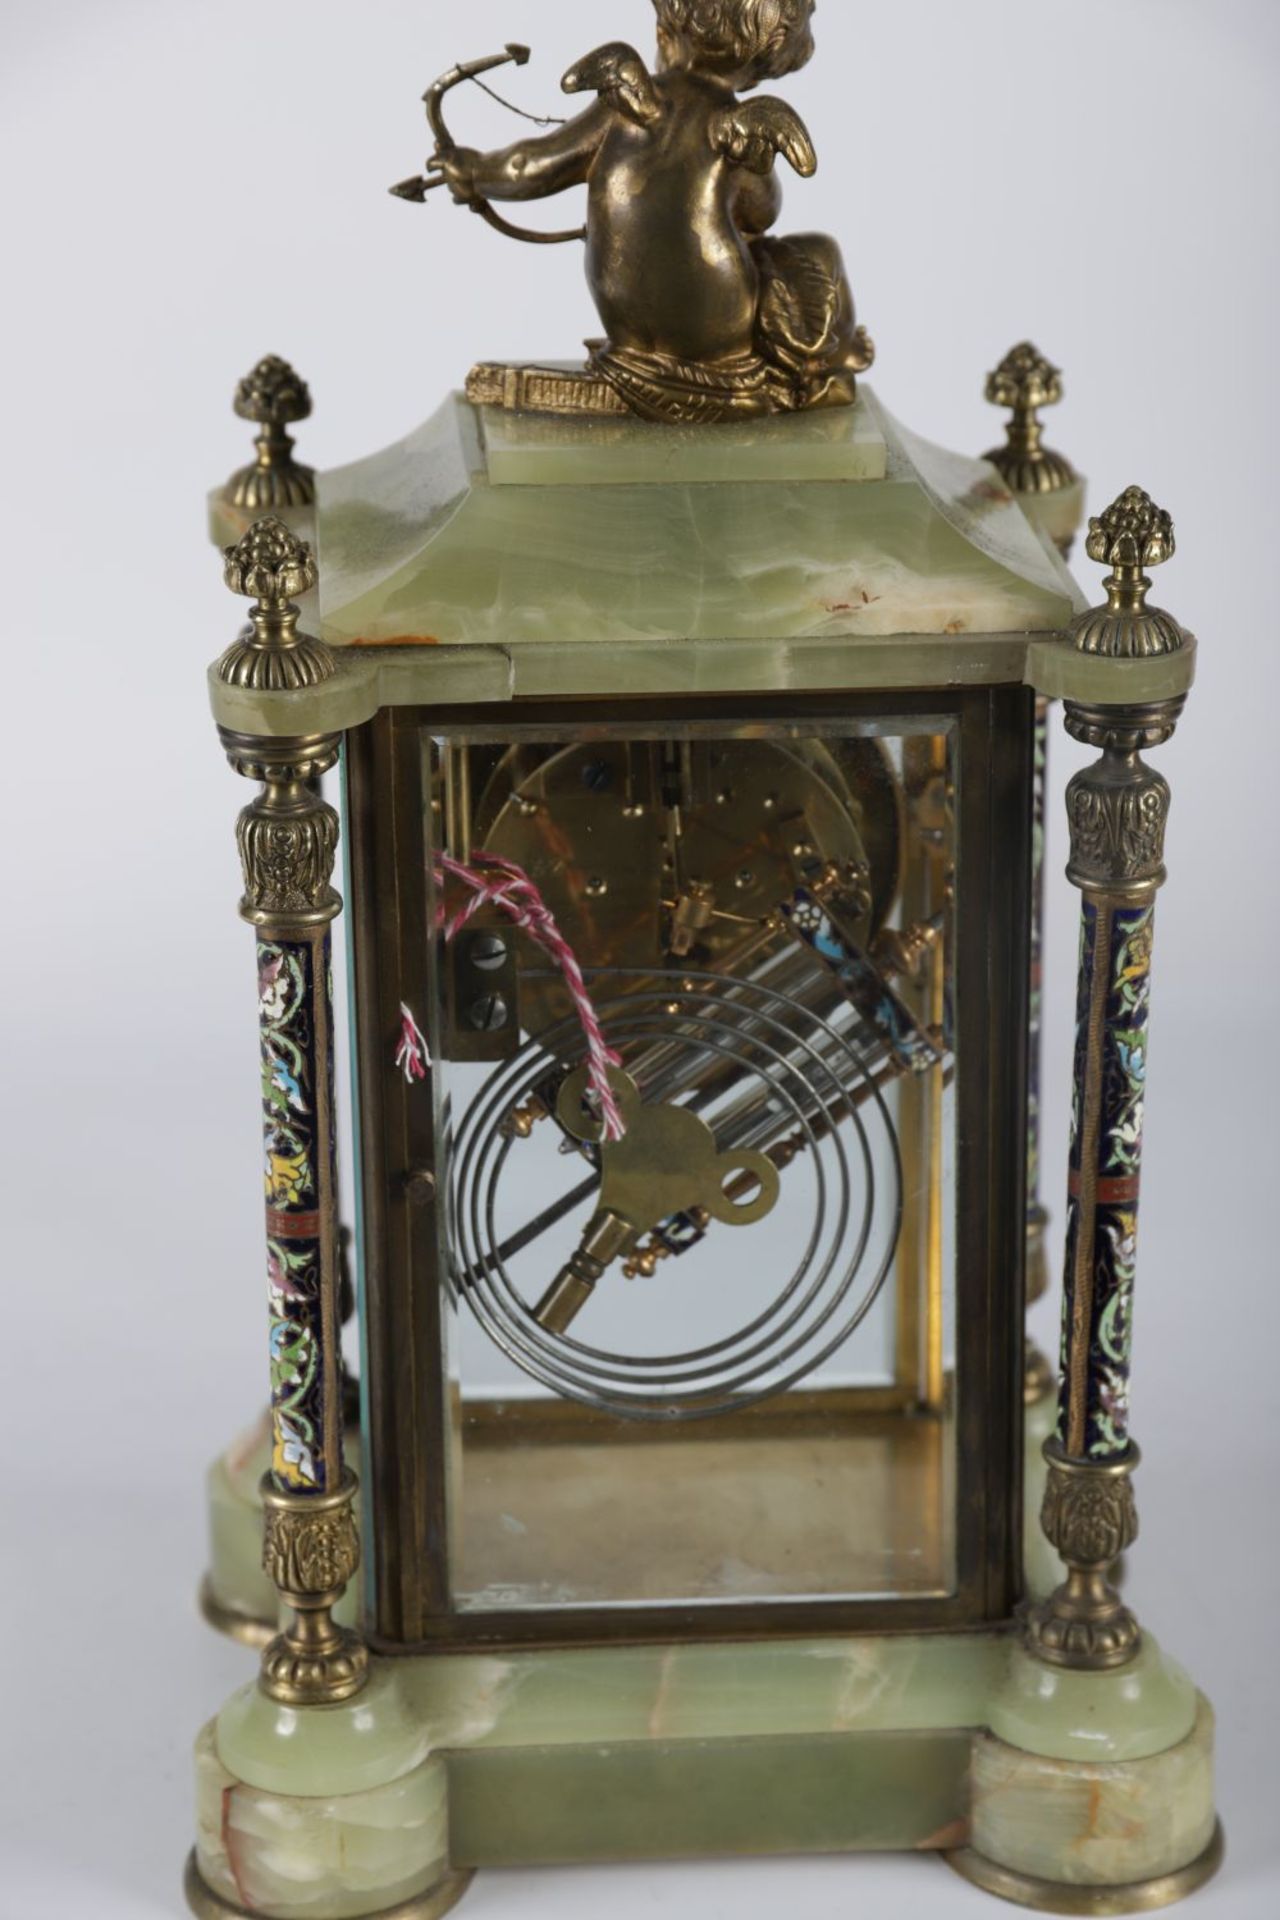 19TH-CENTURY FRENCH CHAMPLEVE ENAMELLED CLOCK - Image 4 of 4